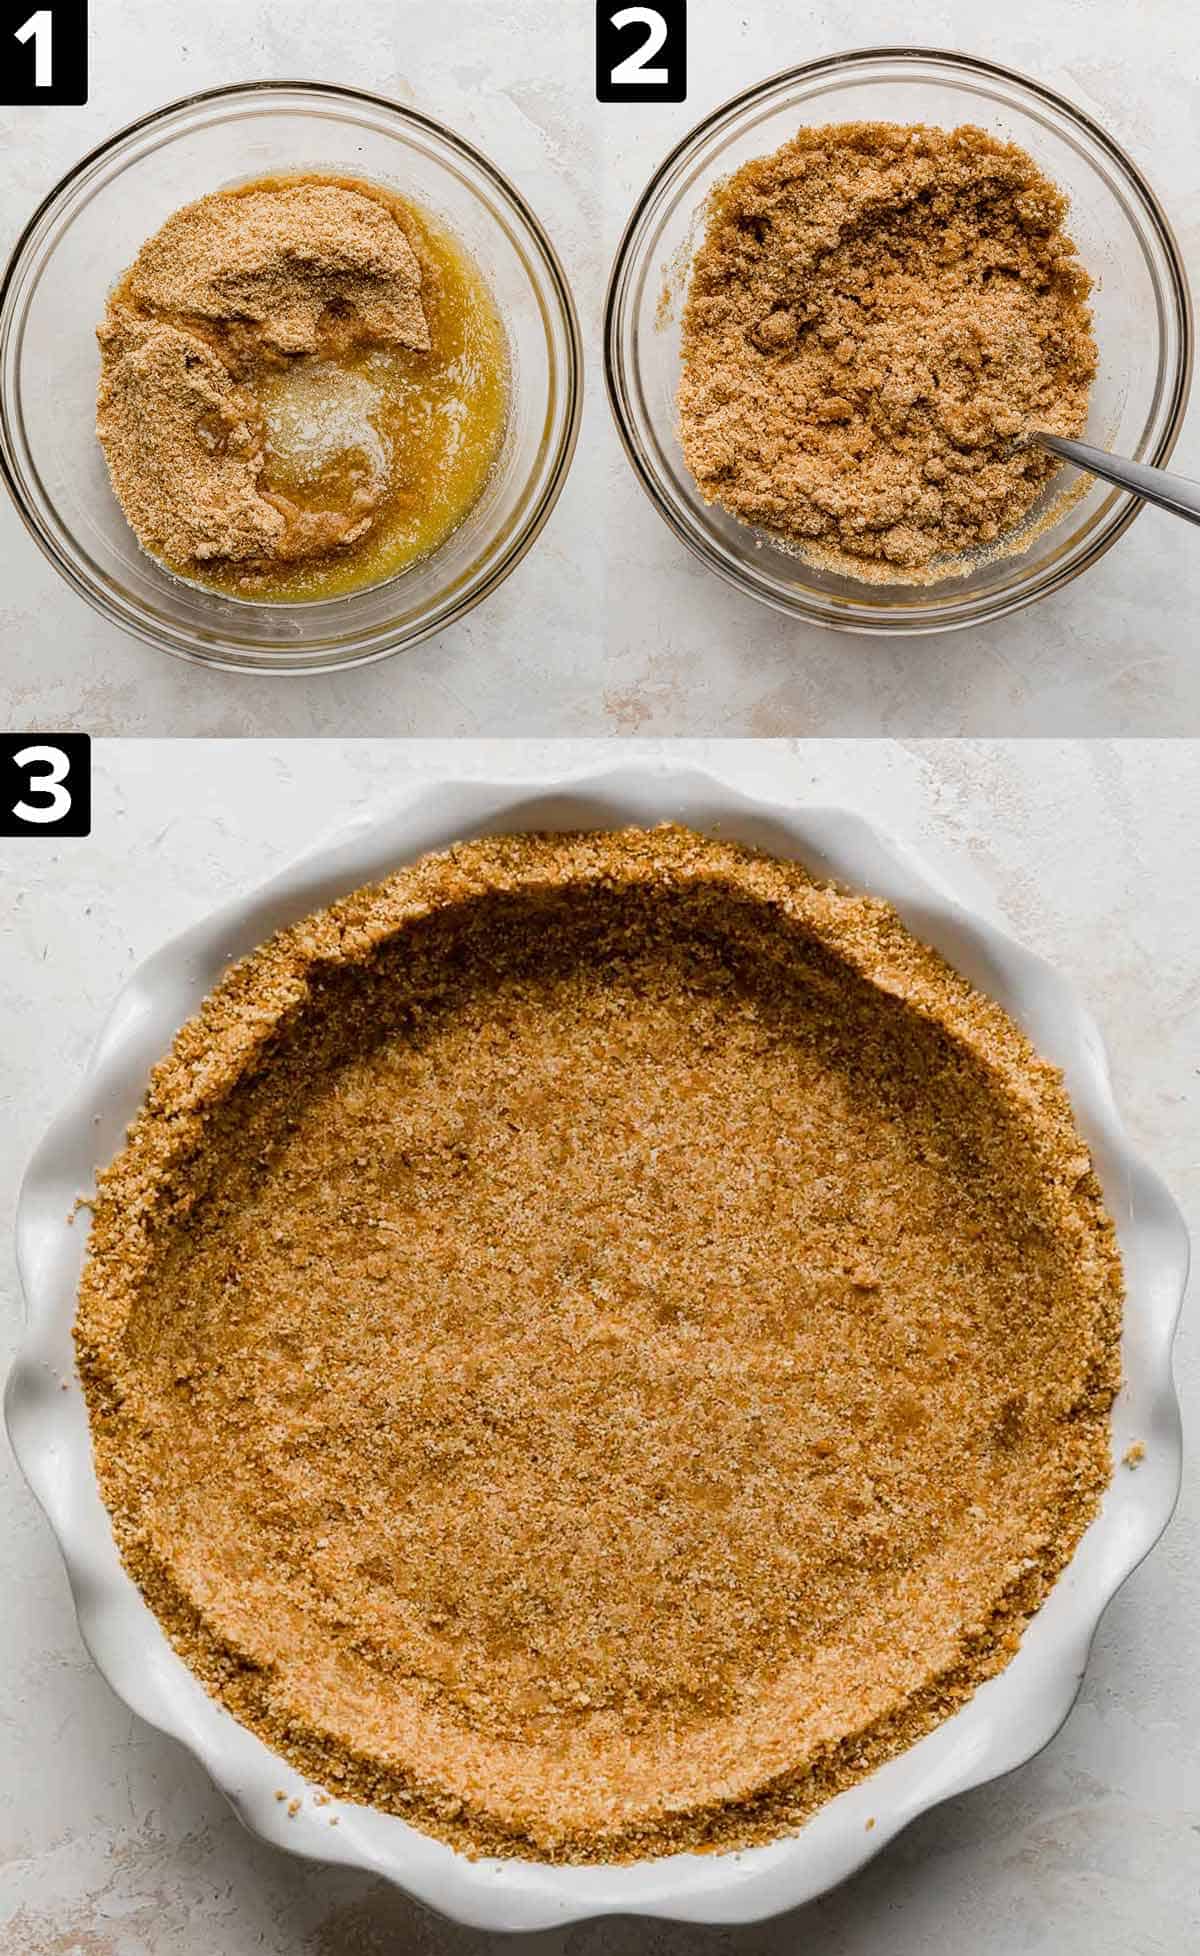 Three photos showing the making of a Nilla wafer banana cream pie pie crust.